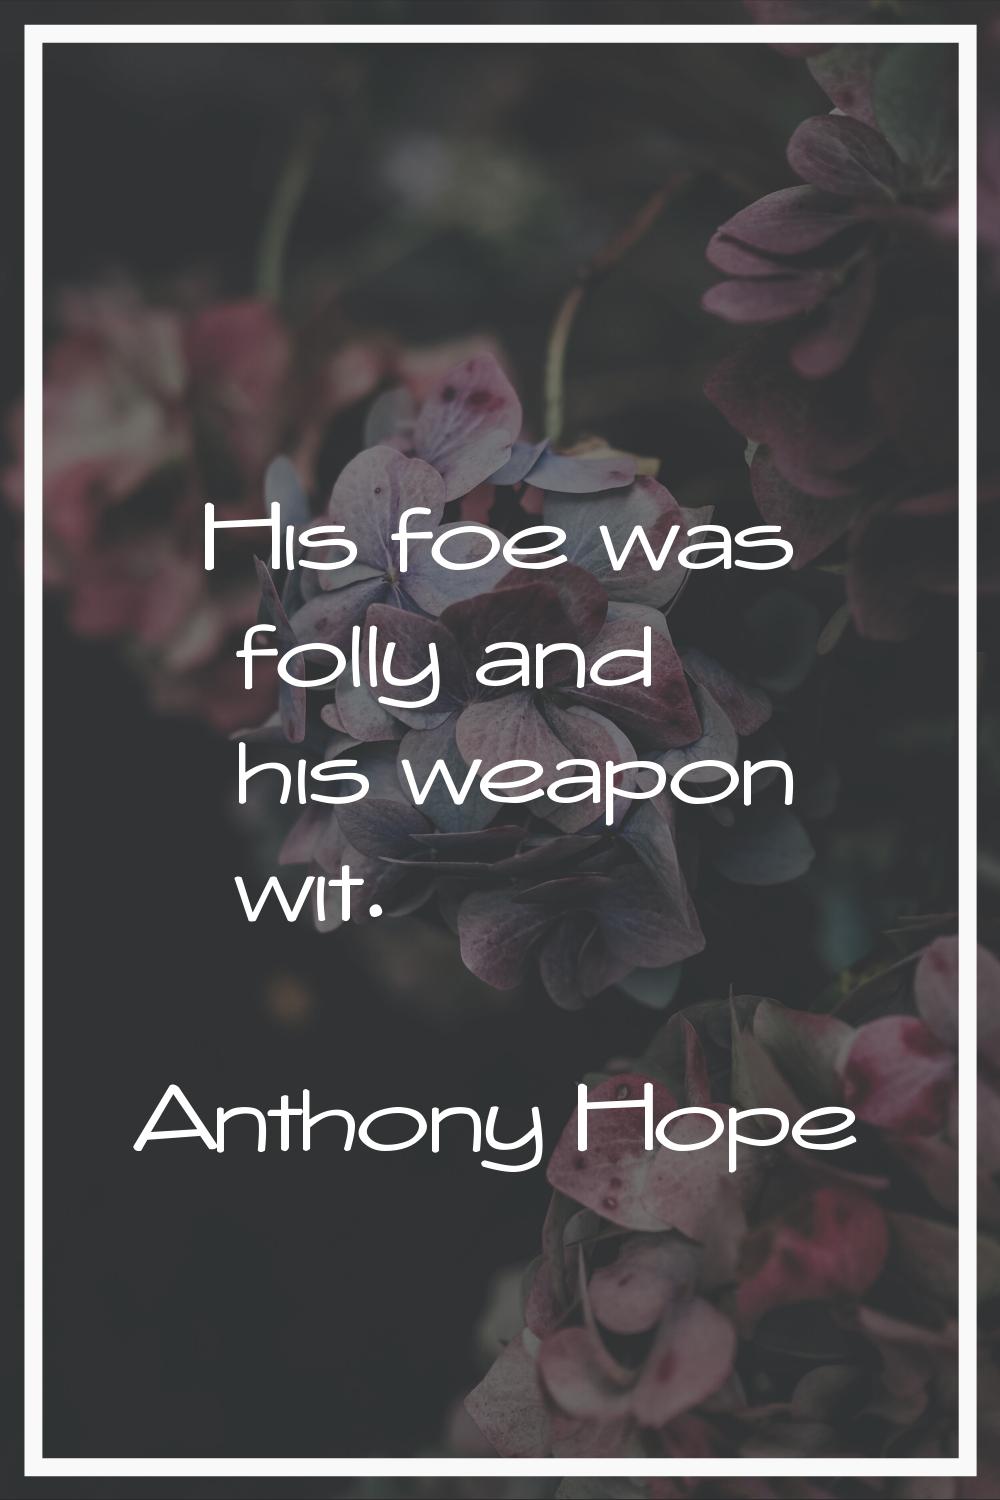 His foe was folly and his weapon wit.